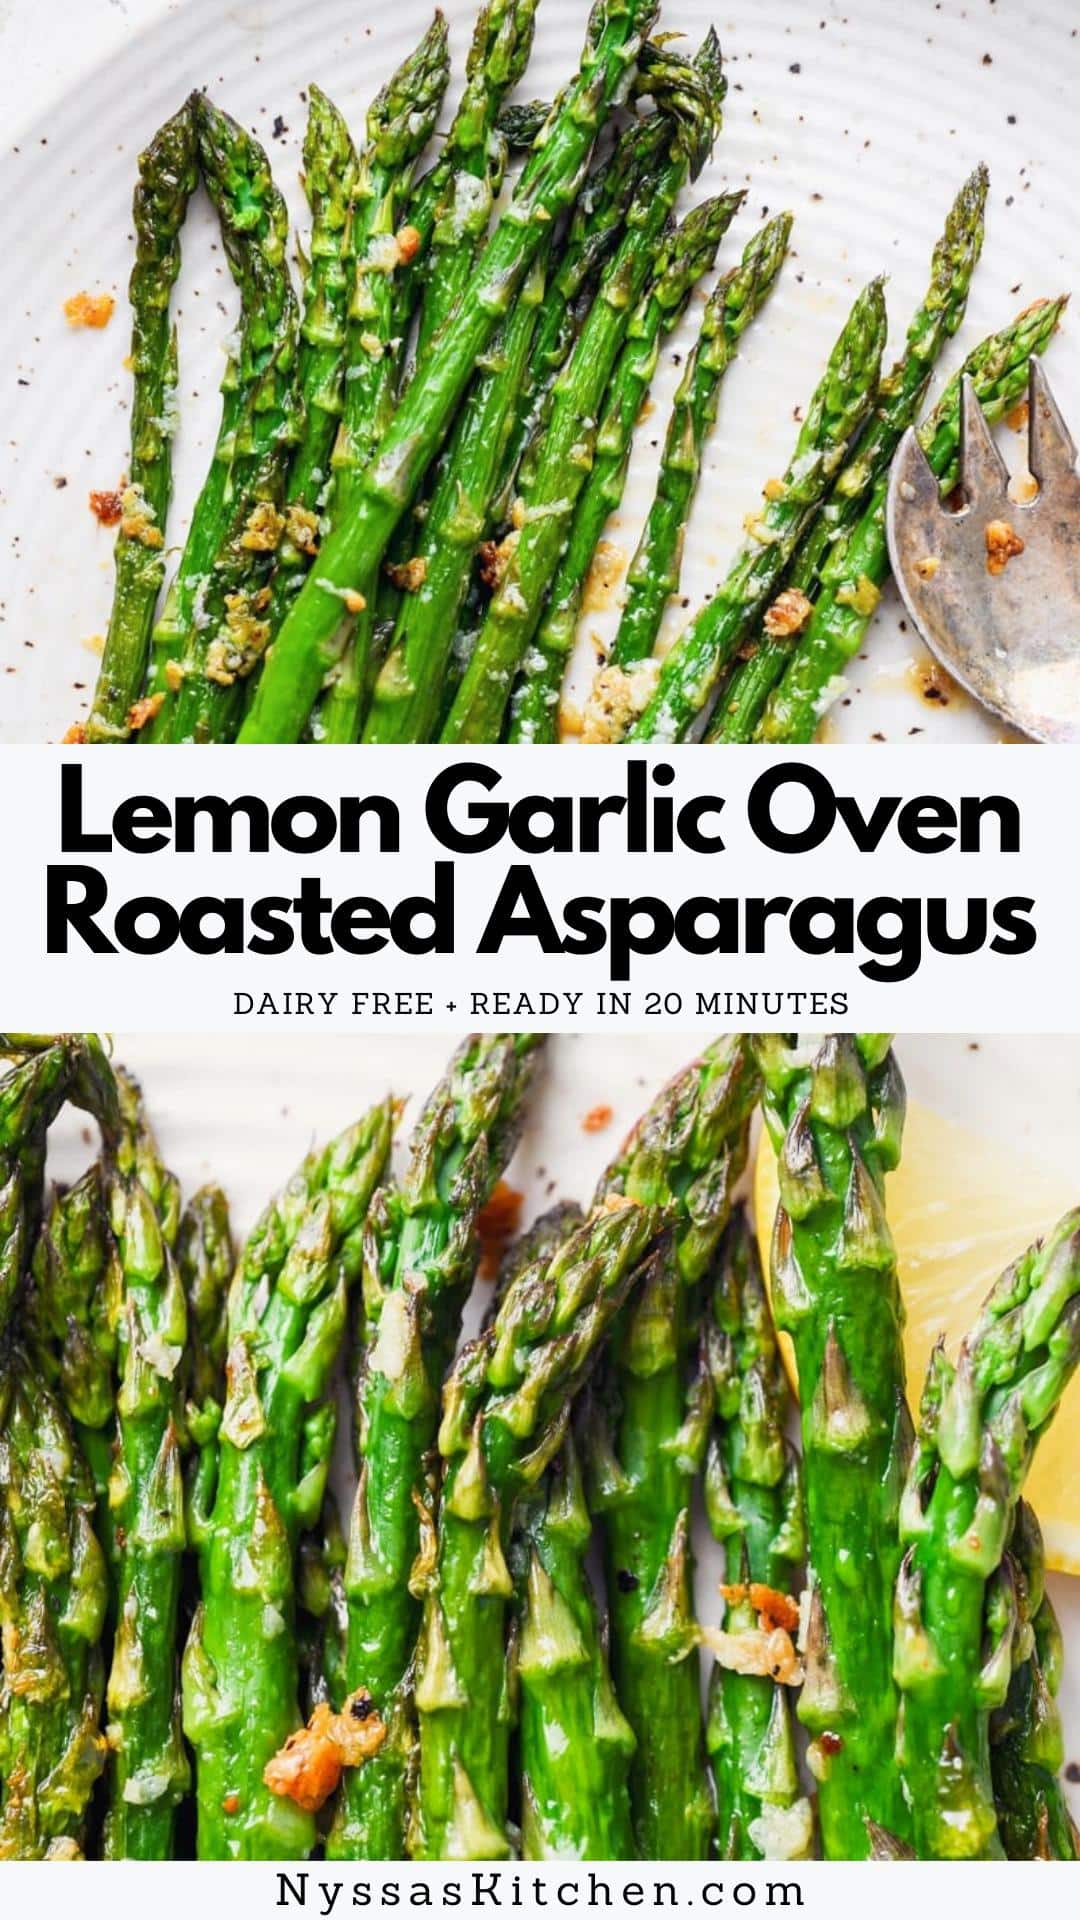 This simple lemon garlic oven roasted asparagus is an incredibly easy side dish that is SO delicious! The best asparagus recipe that's great on its own or added to other dishes. Perfectly seasoned, ready in 20 minutes, dairy free, and super flavorful.